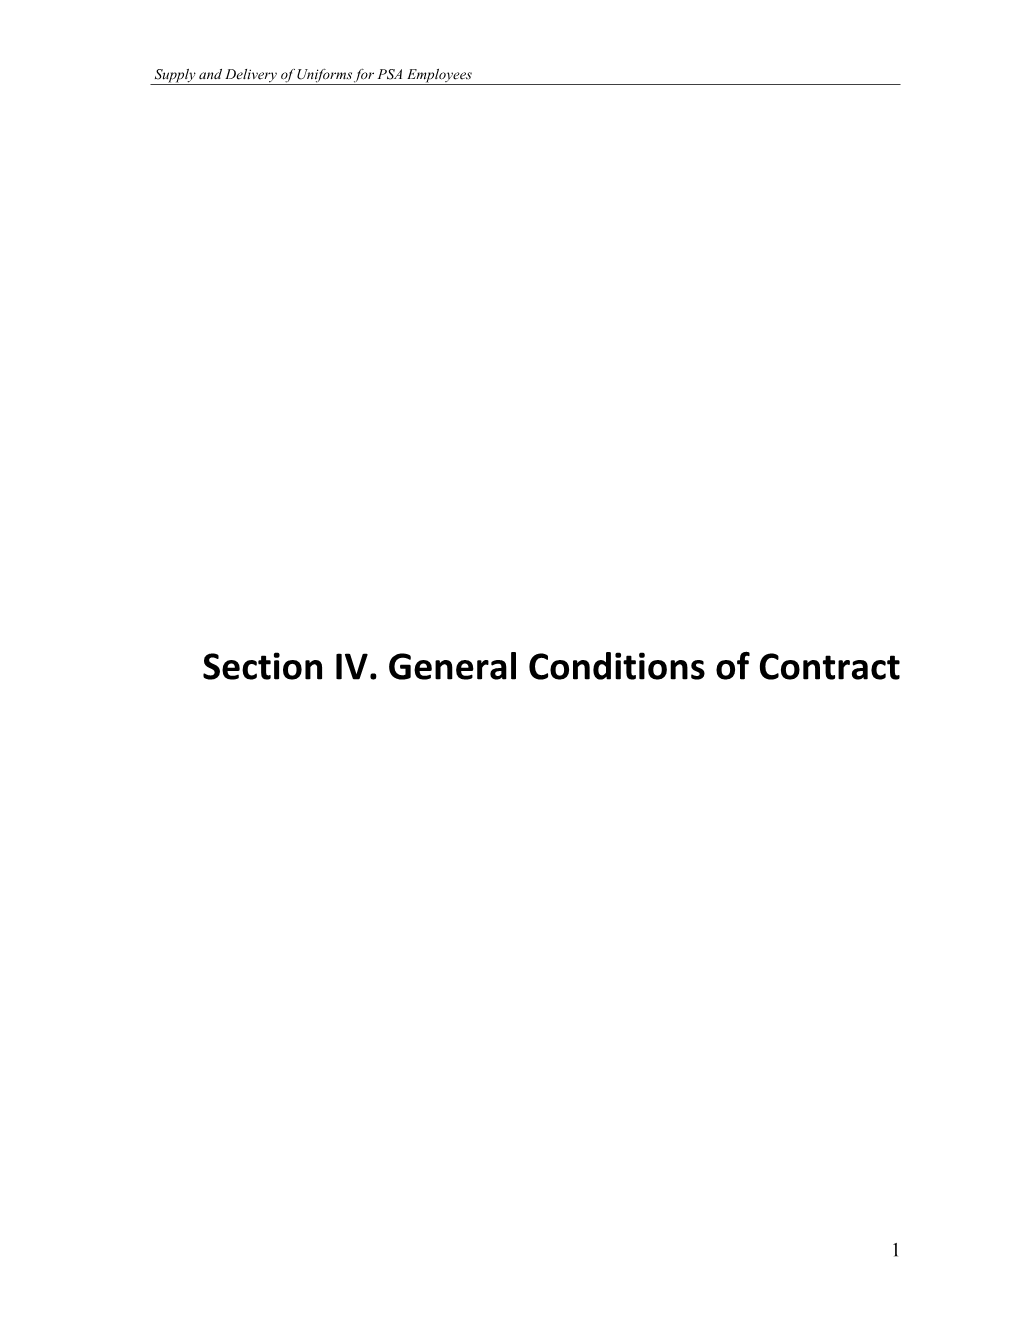 Sectioniv. Generalconditionsofcontract